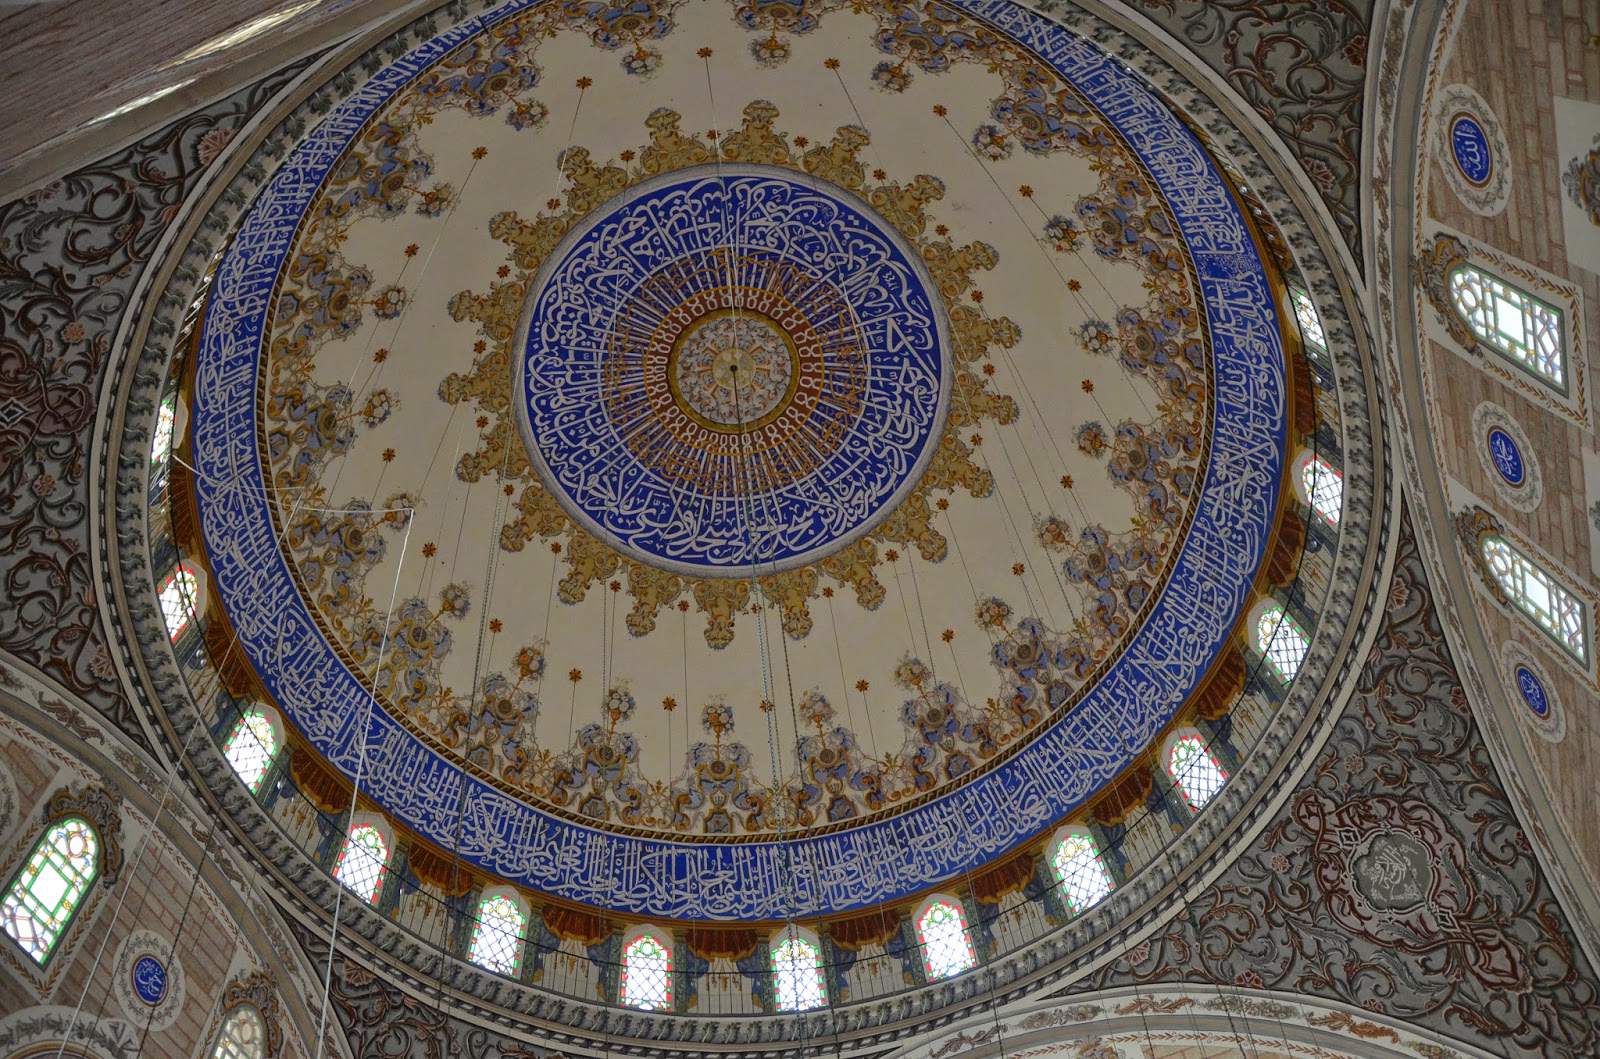 Dome at the Bayezid II Mosque at the Bayezid II Complex in Edirne, Turkey